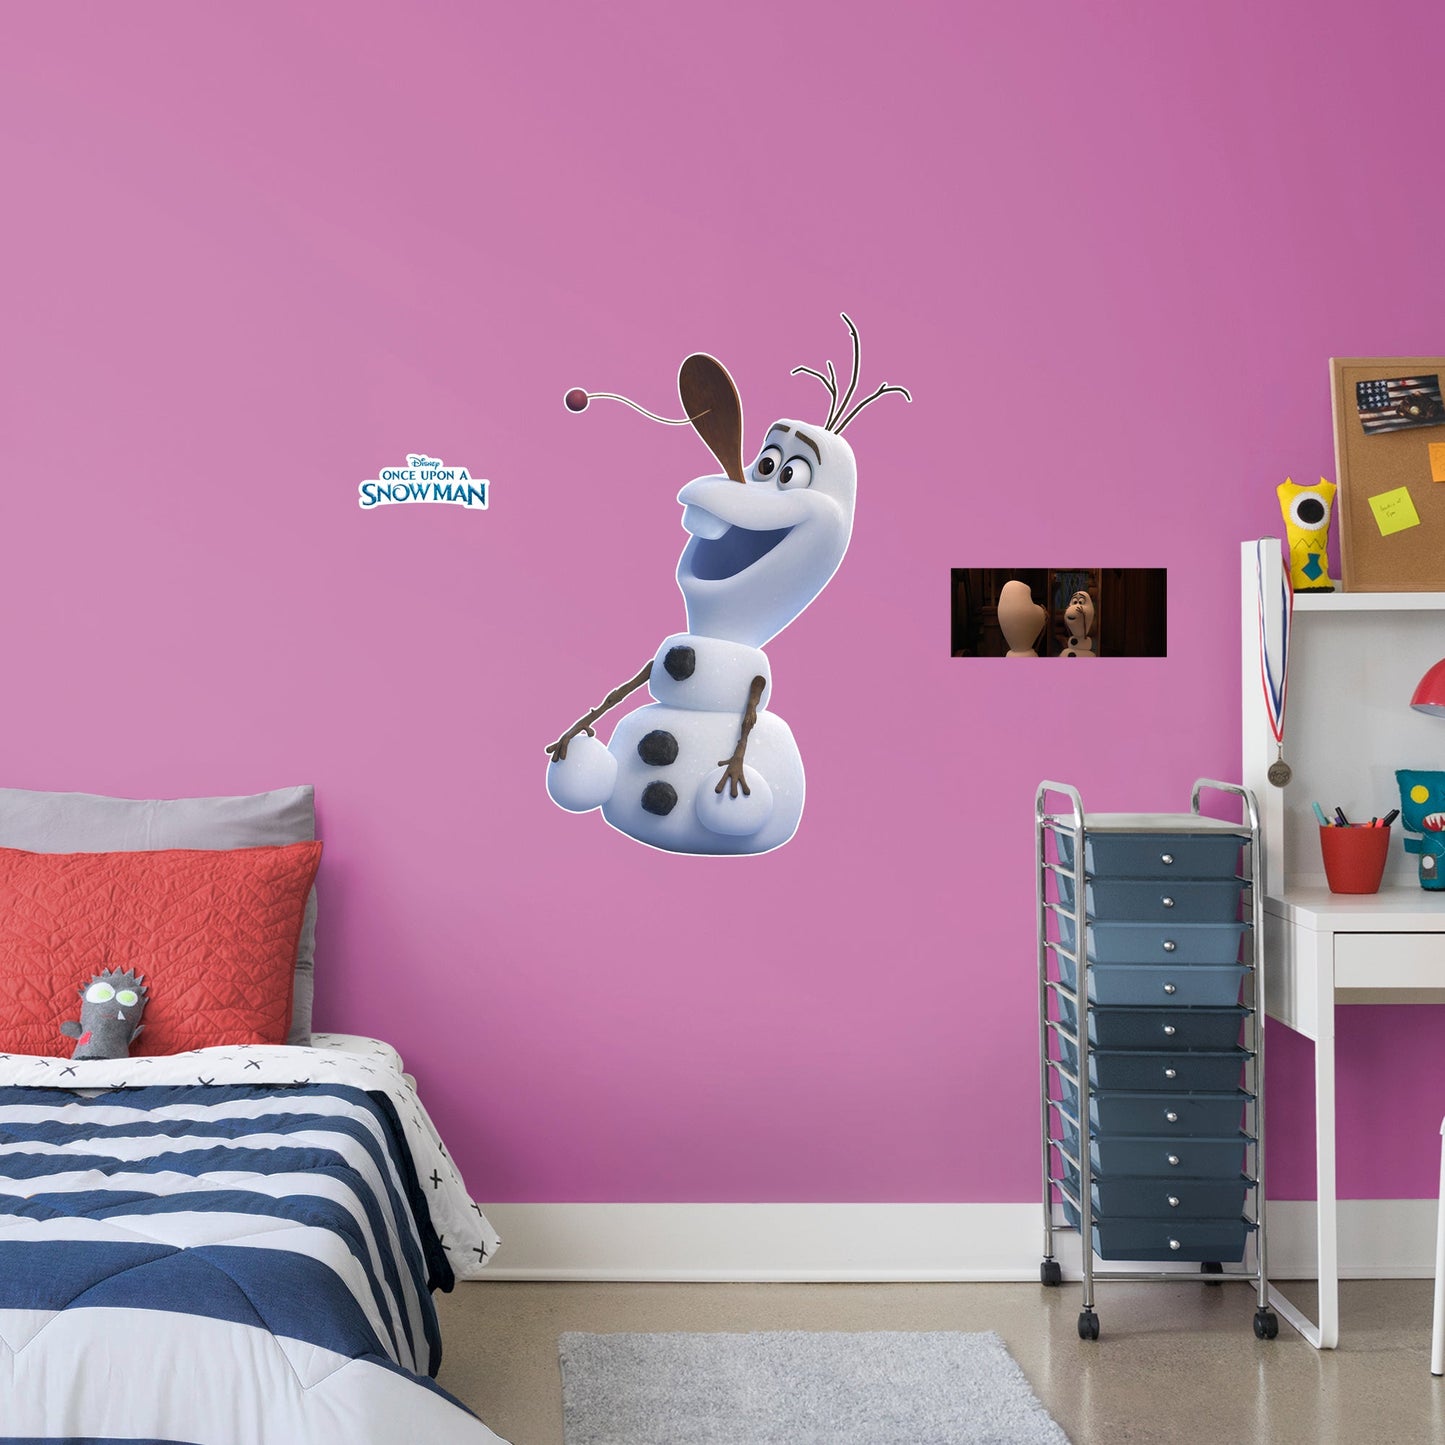 Olaf: Paddle - Once Upon A Snowman - Officially Licensed Disney Removable Wall Decal